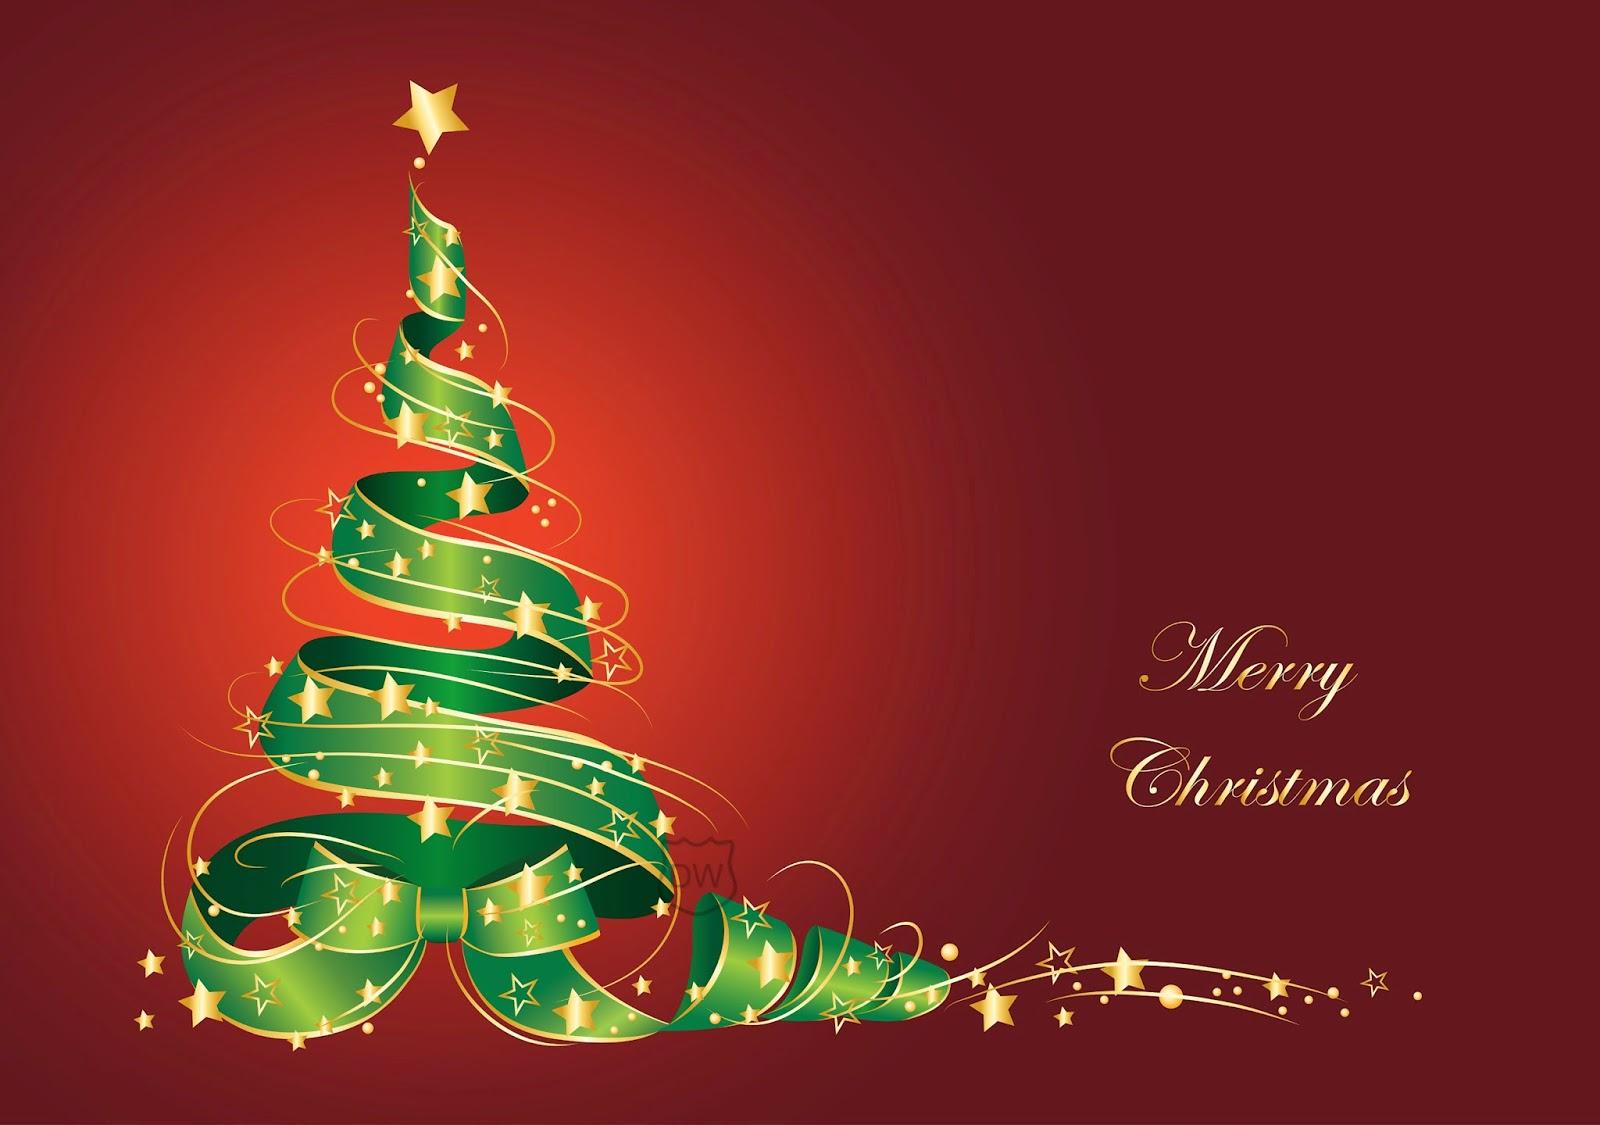 Information Magazine: Happy Christmas And Merry Christmas HD